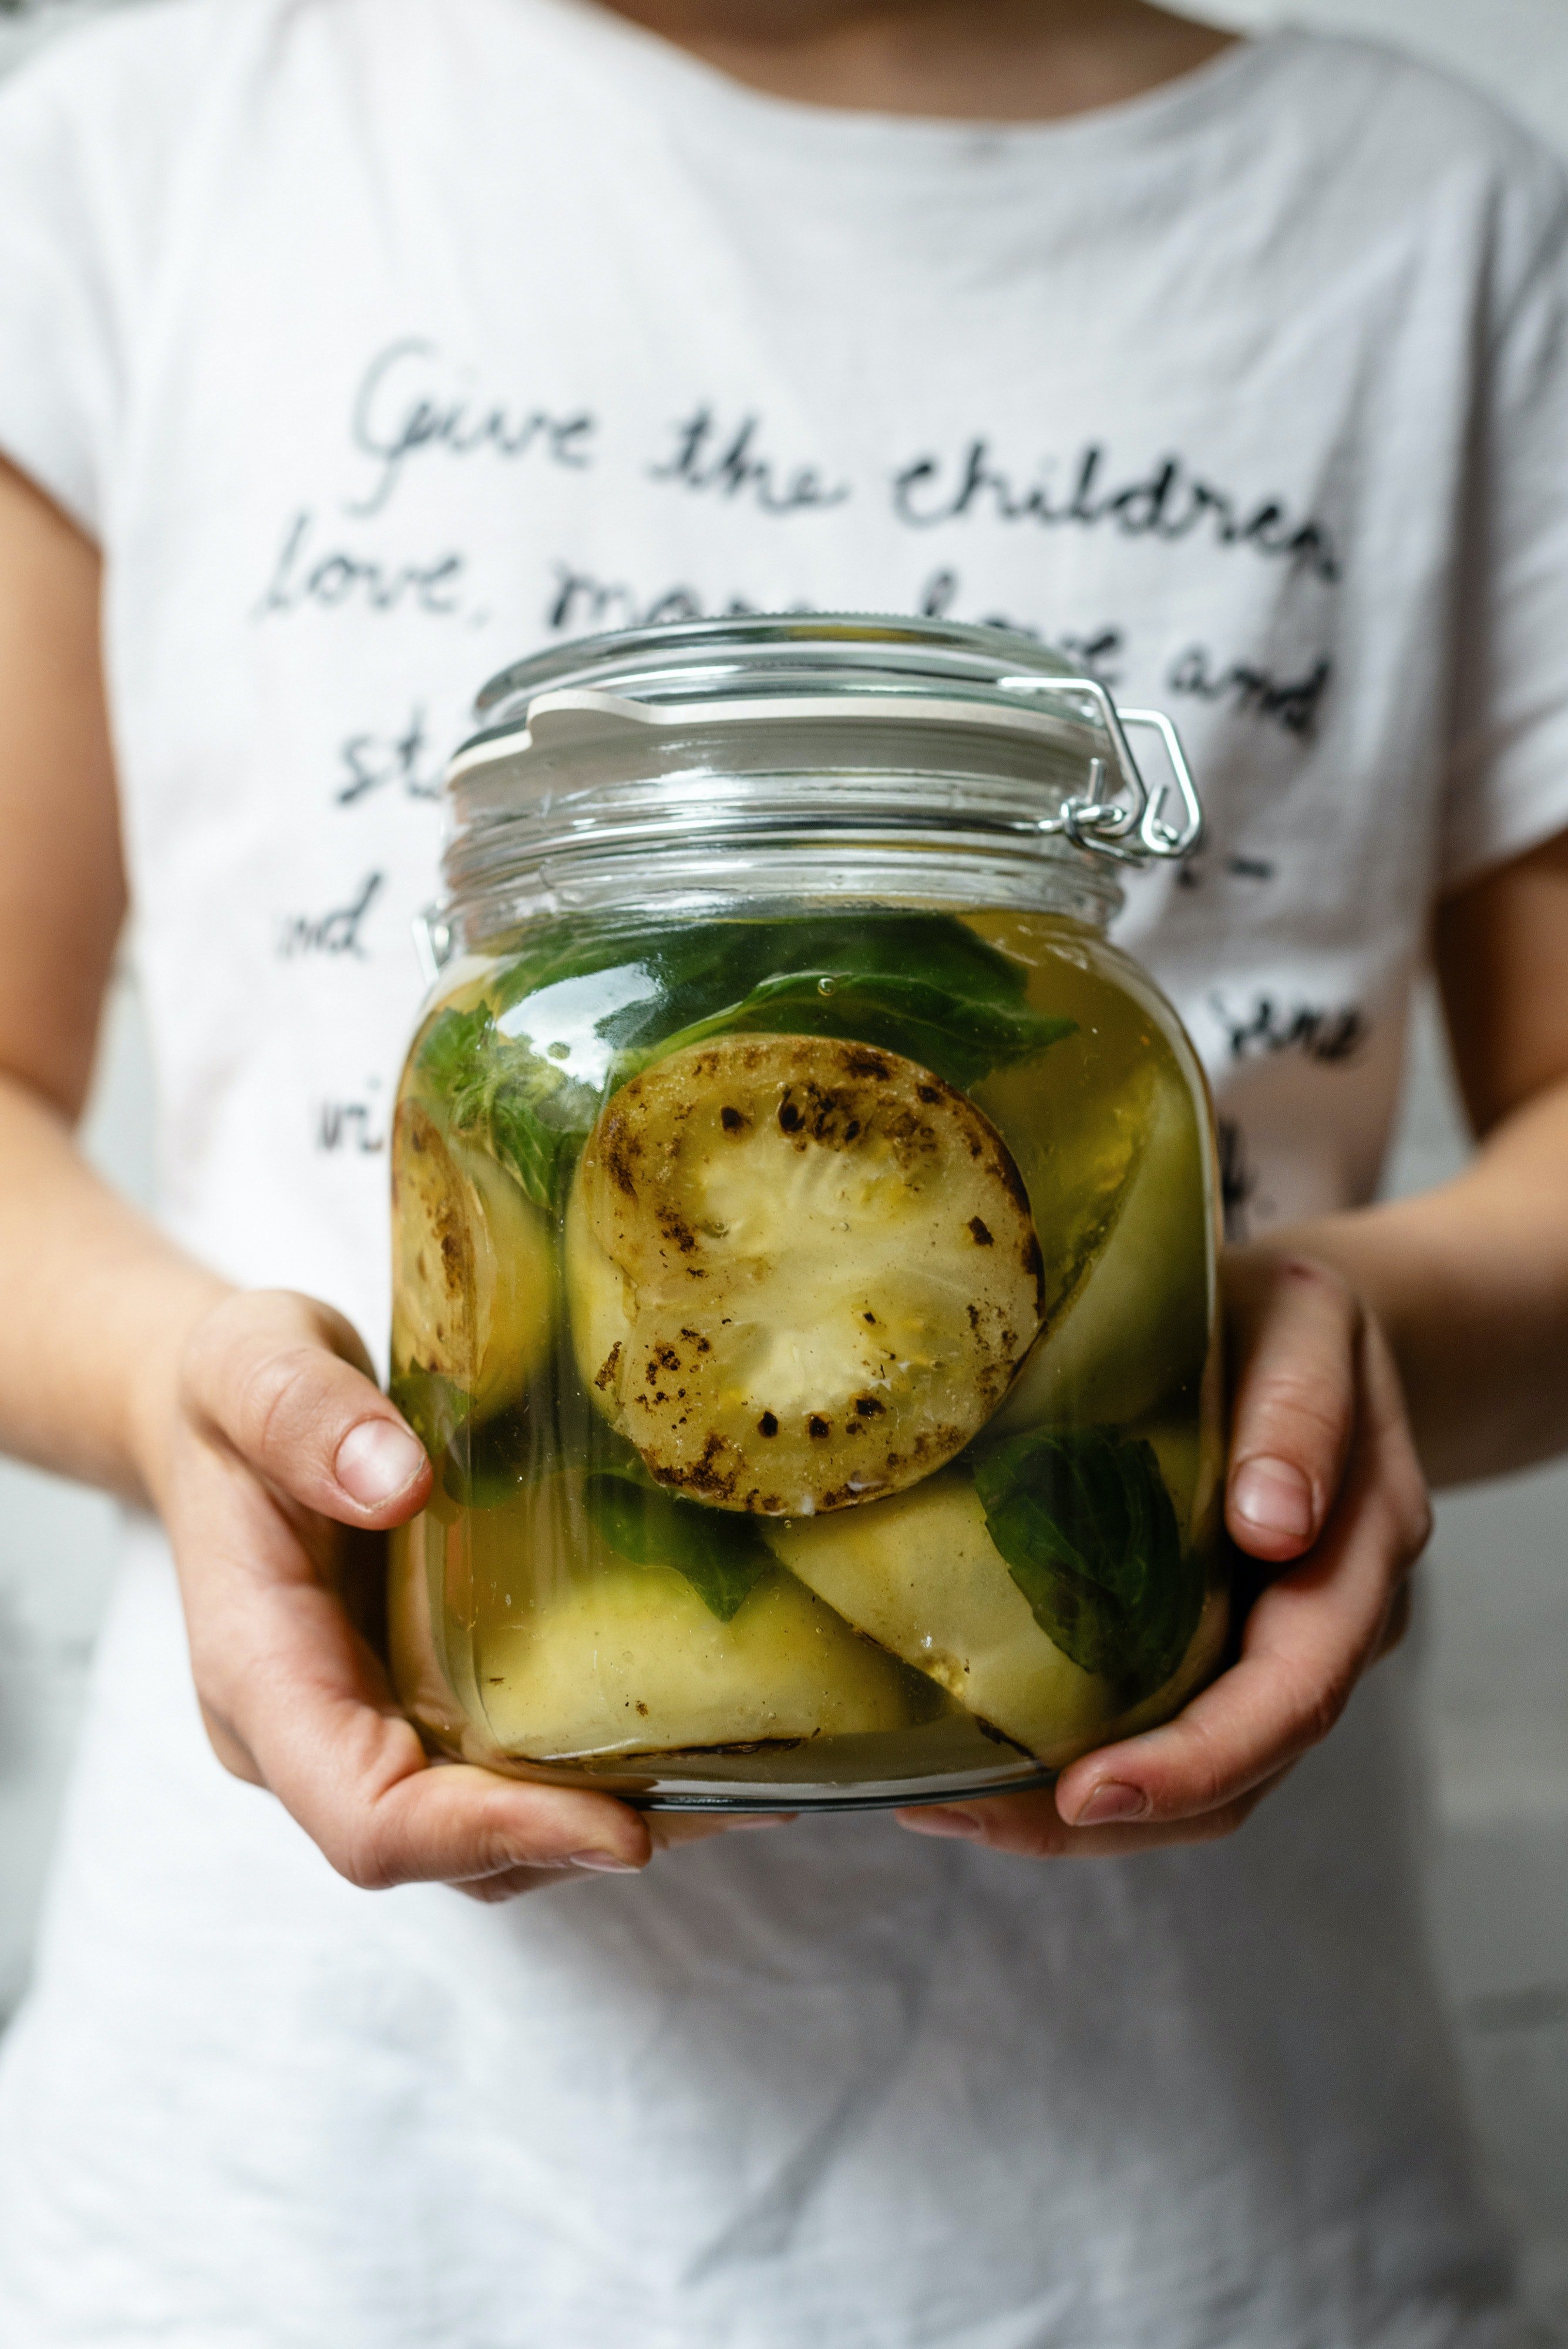 Pictured - A woman holding a jar of pickled zucchini | Source: Pexels 